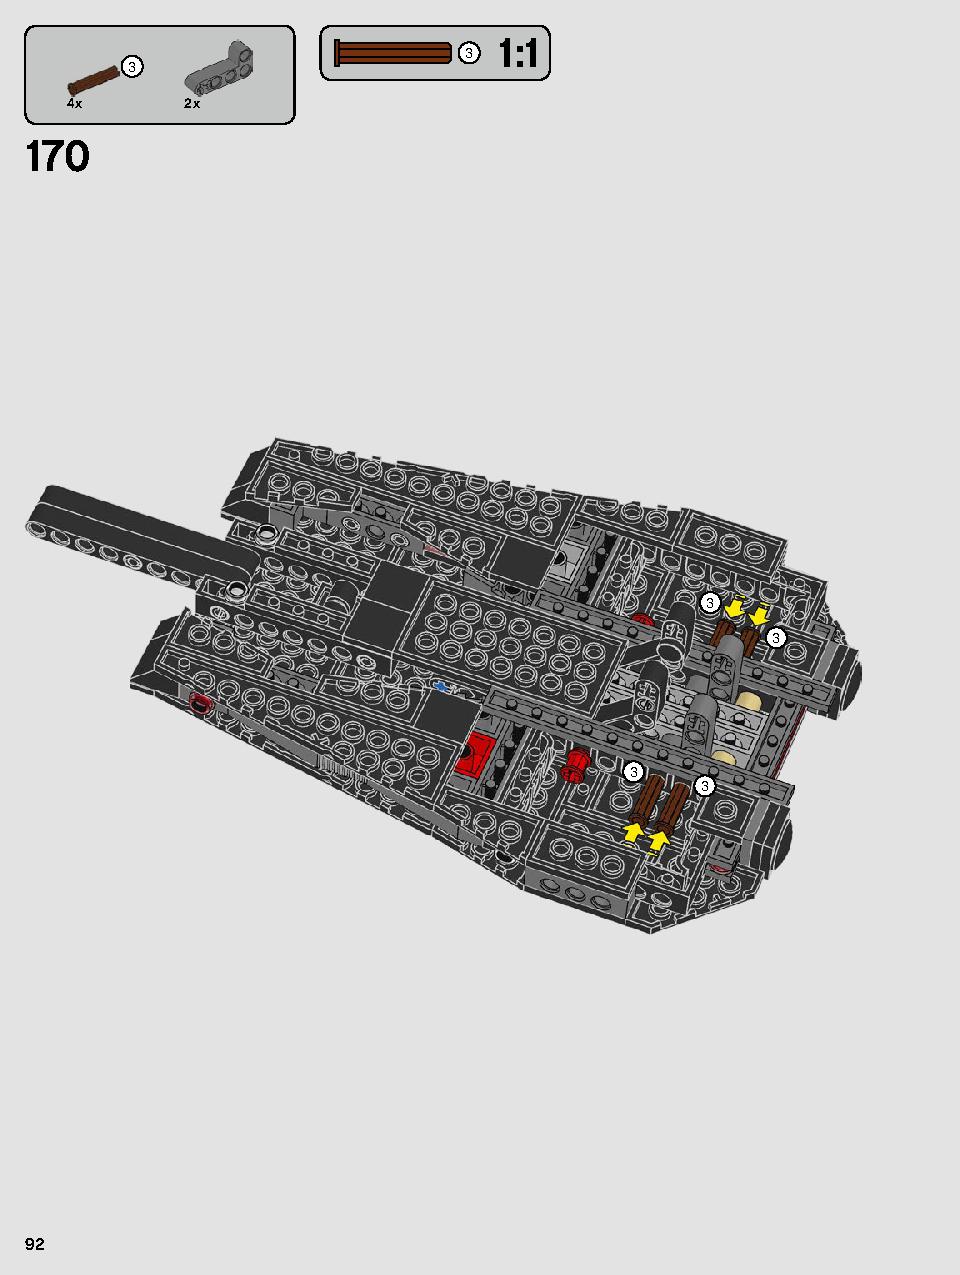 Kylo Ren's Shuttle 75256 LEGO information LEGO instructions 92 page